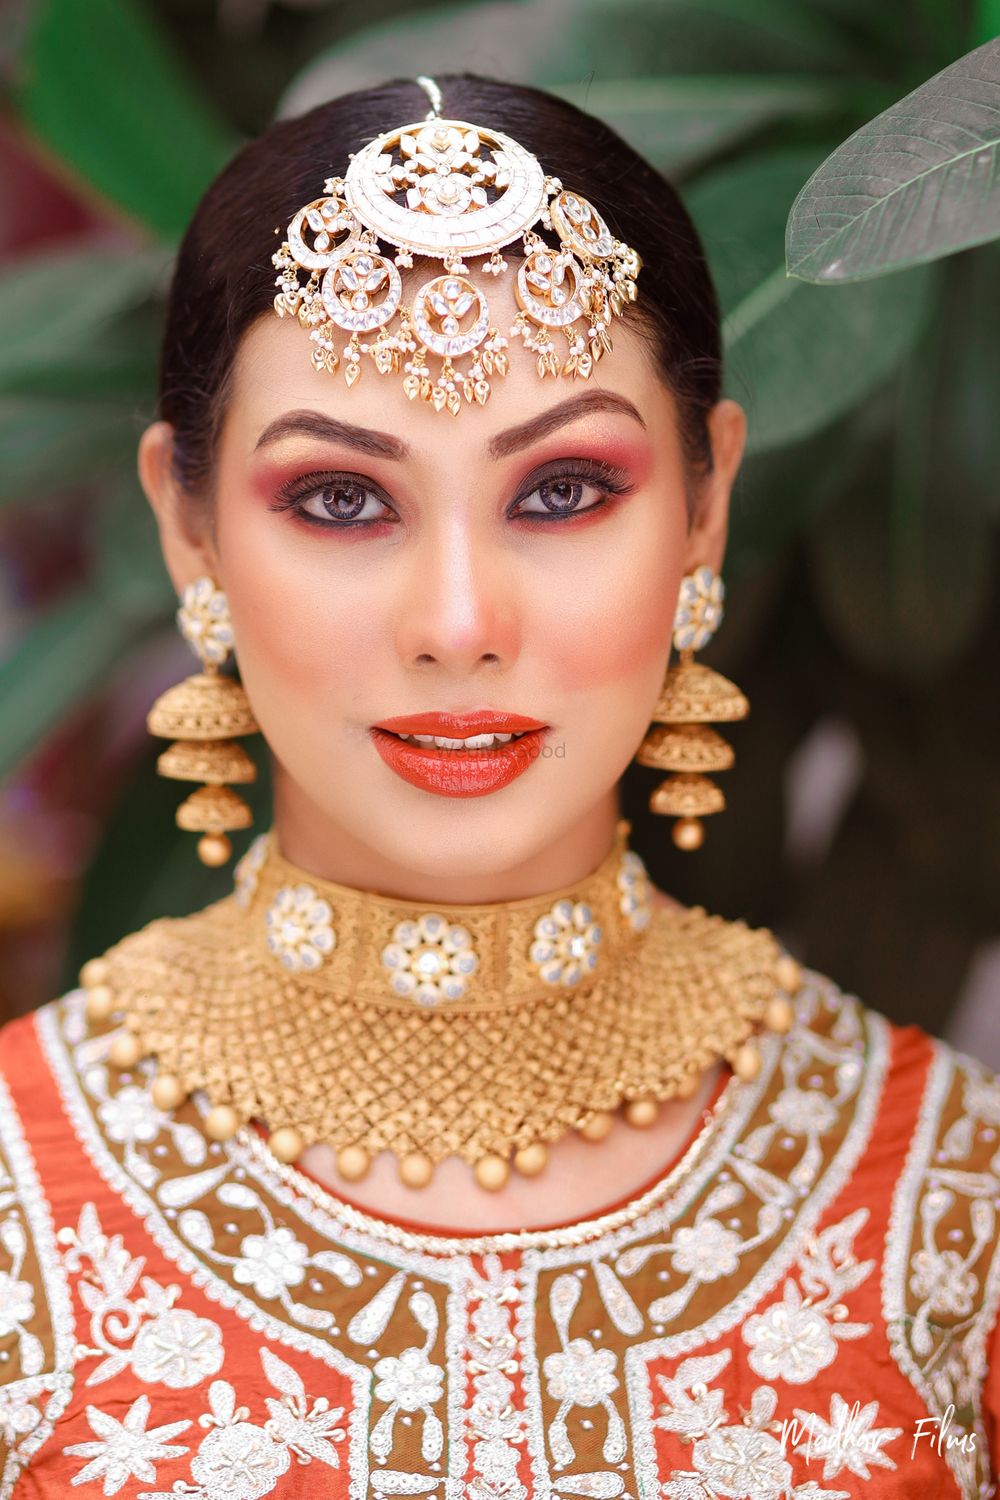 Photo From @kamnasharmofficial Bridal makeupartist l freelancermakeupartist For enquiries - +916280413161,+919915777213 - By Kamna Sharma